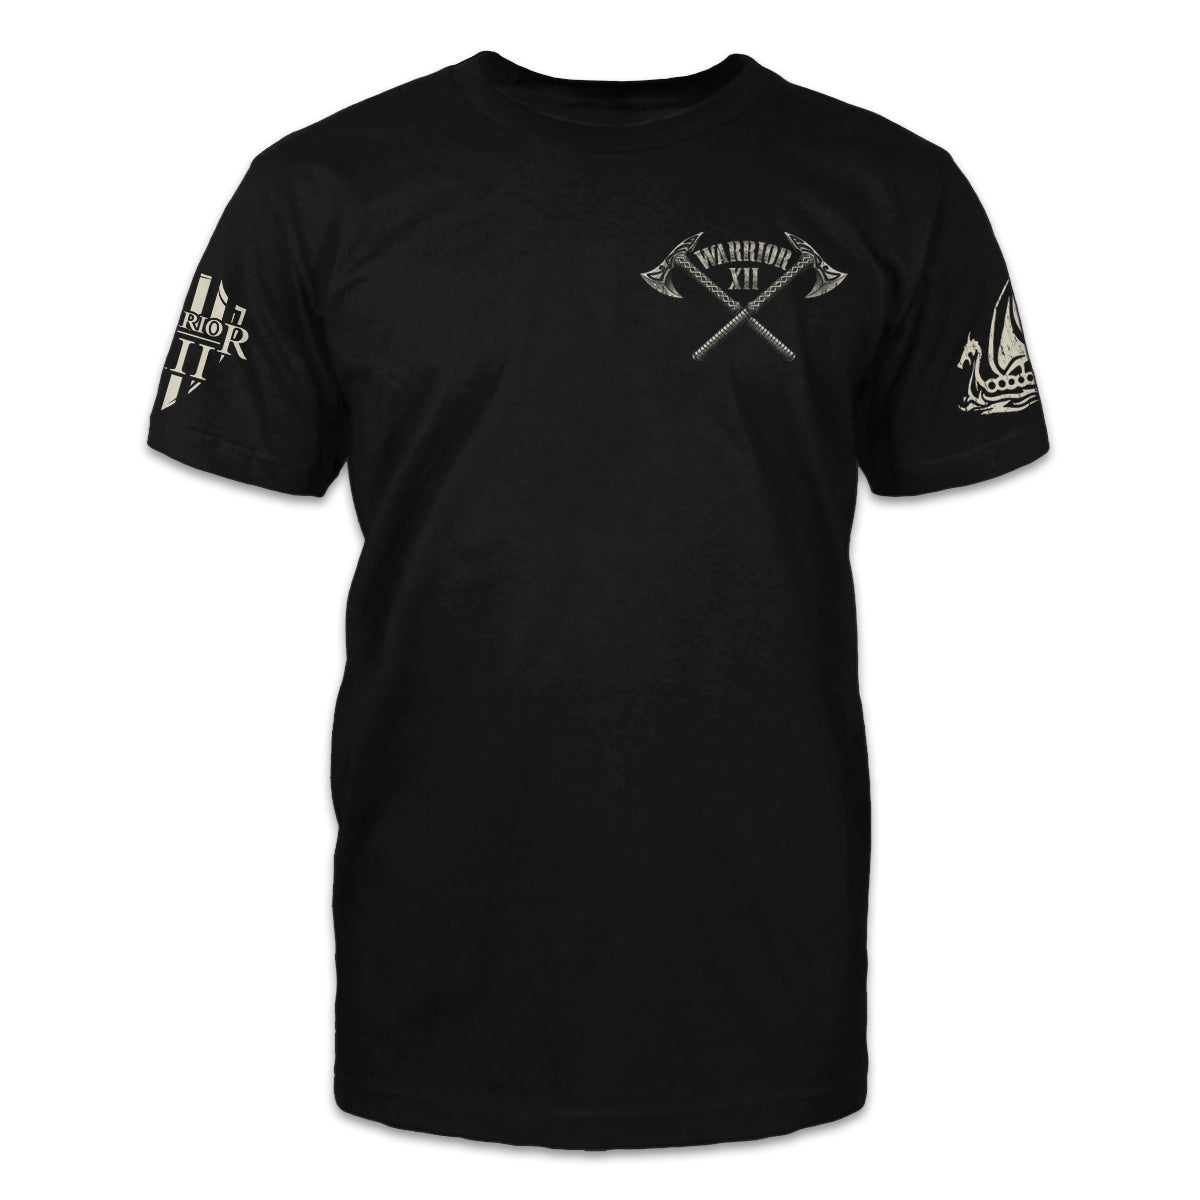 A black American Viking t-shirt with the words "Warrior 12" and two axes printed on the front of the shirt.